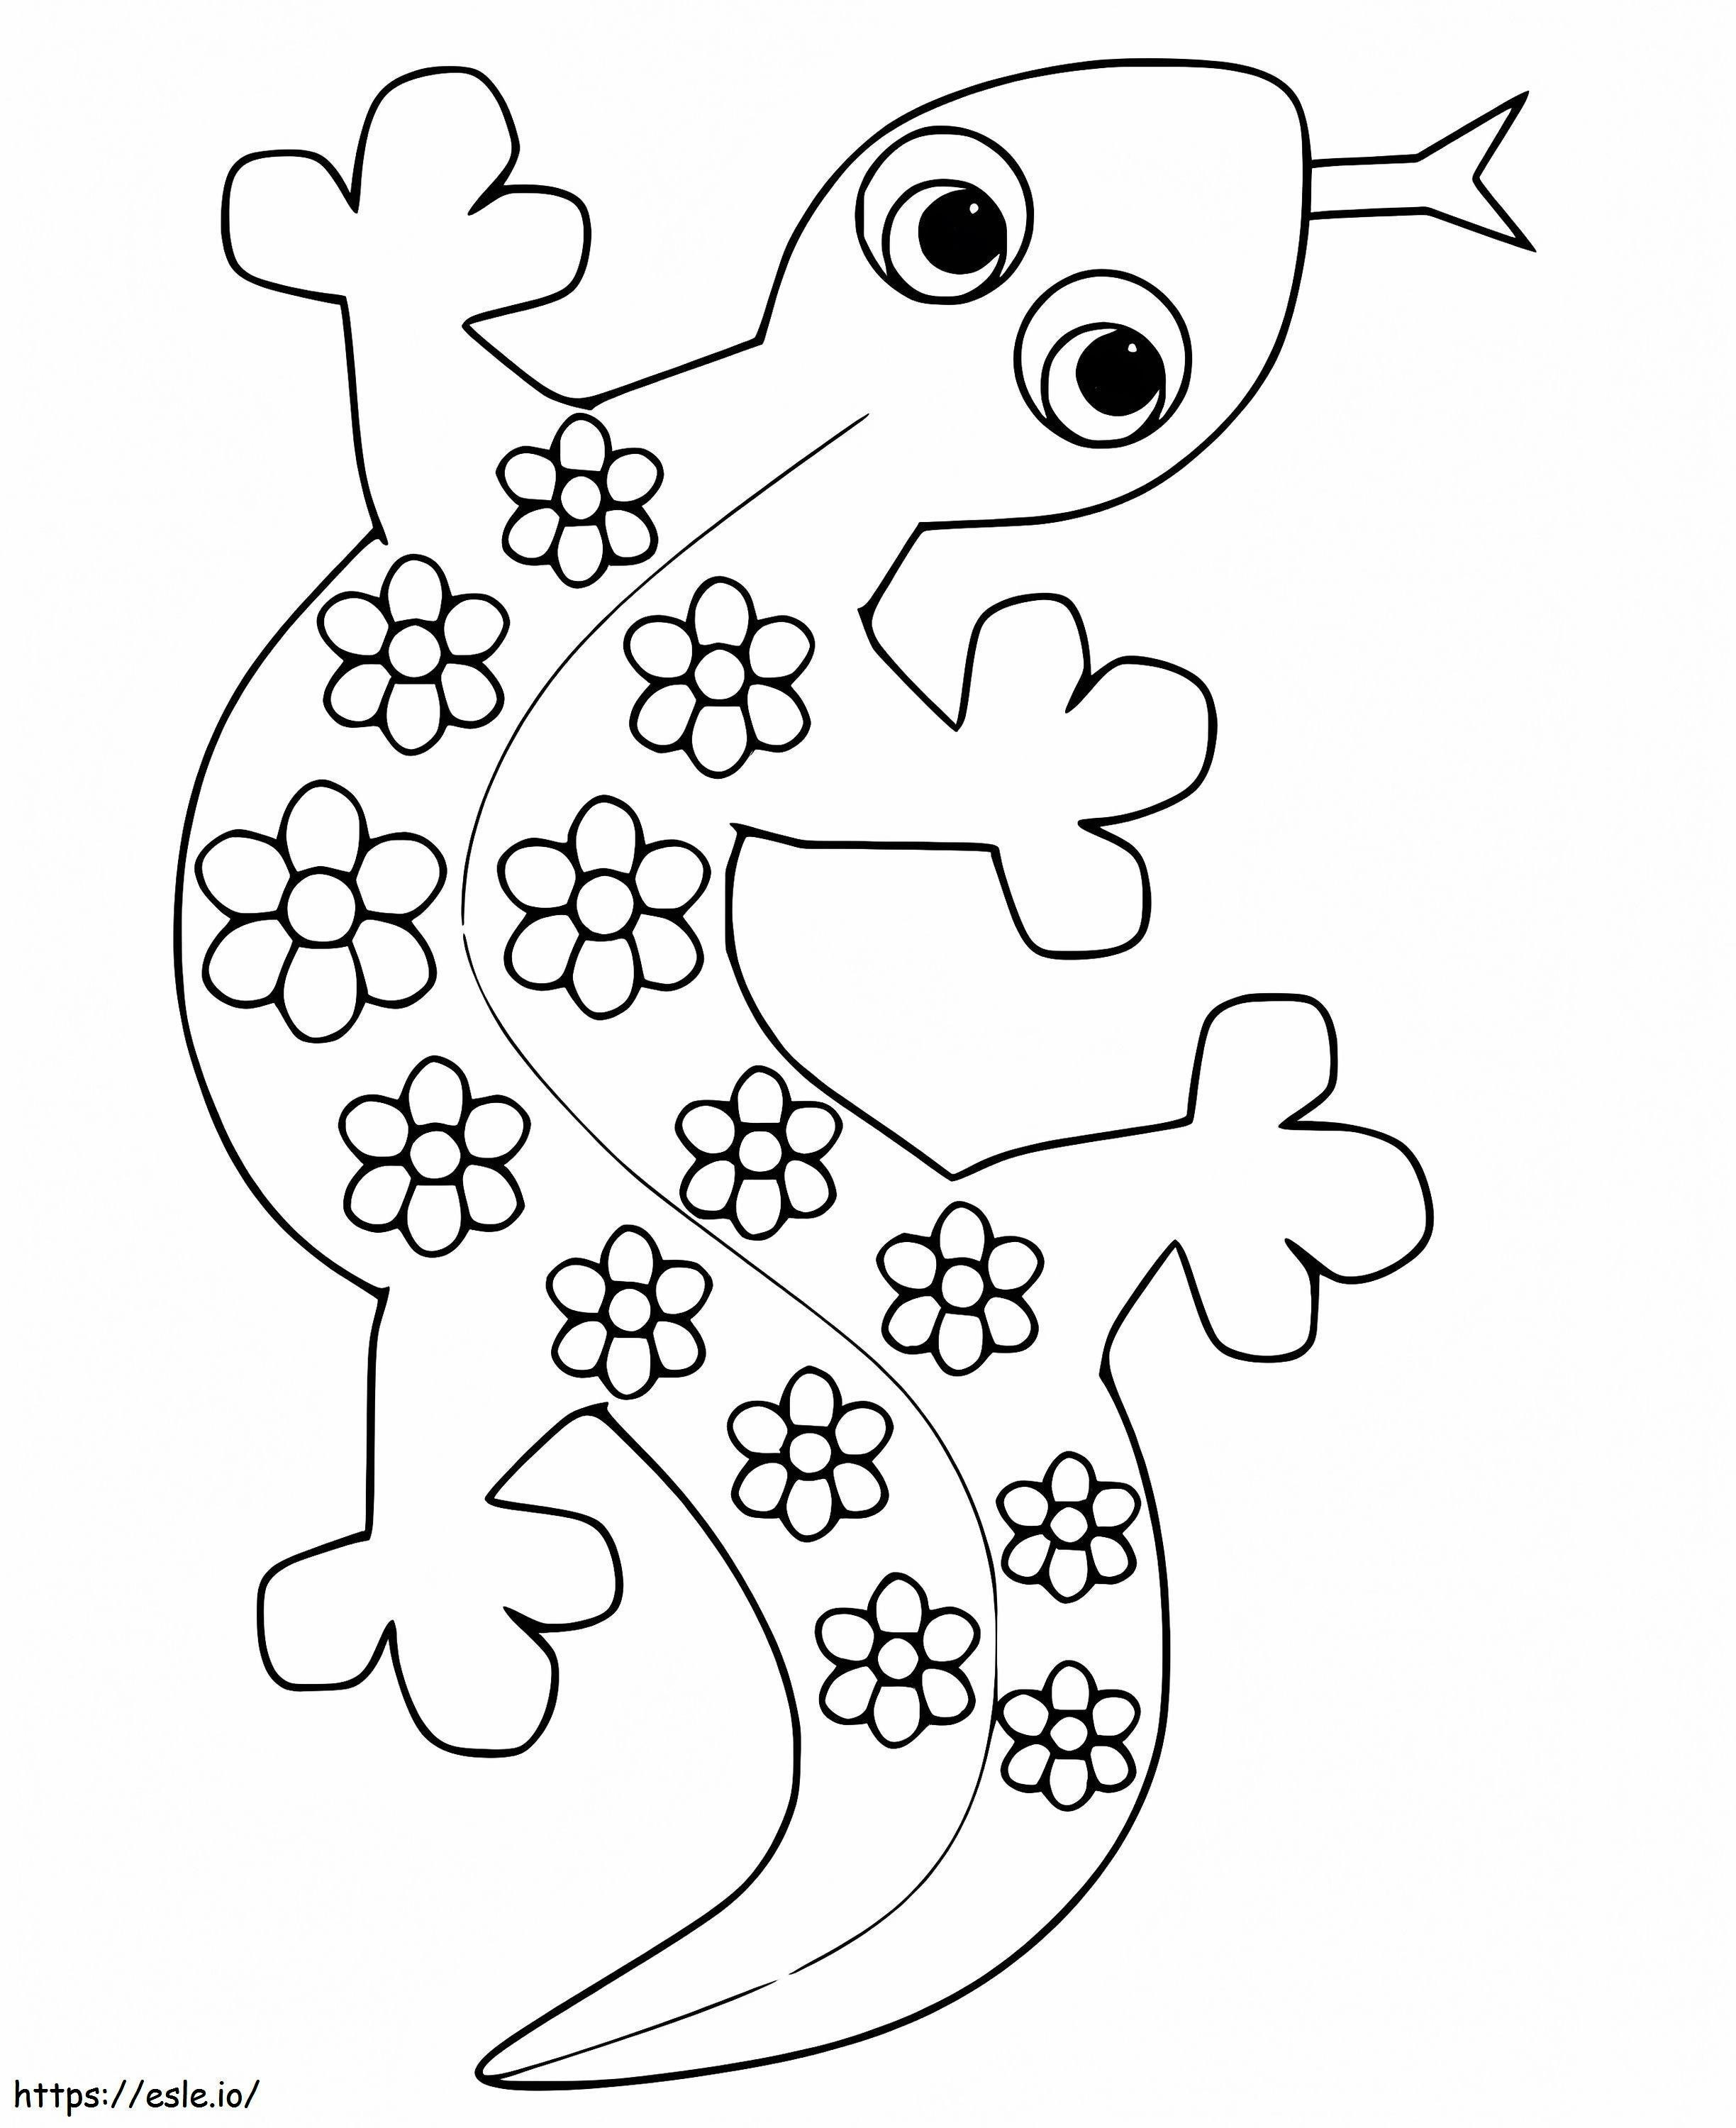 Lovely Gecko coloring page